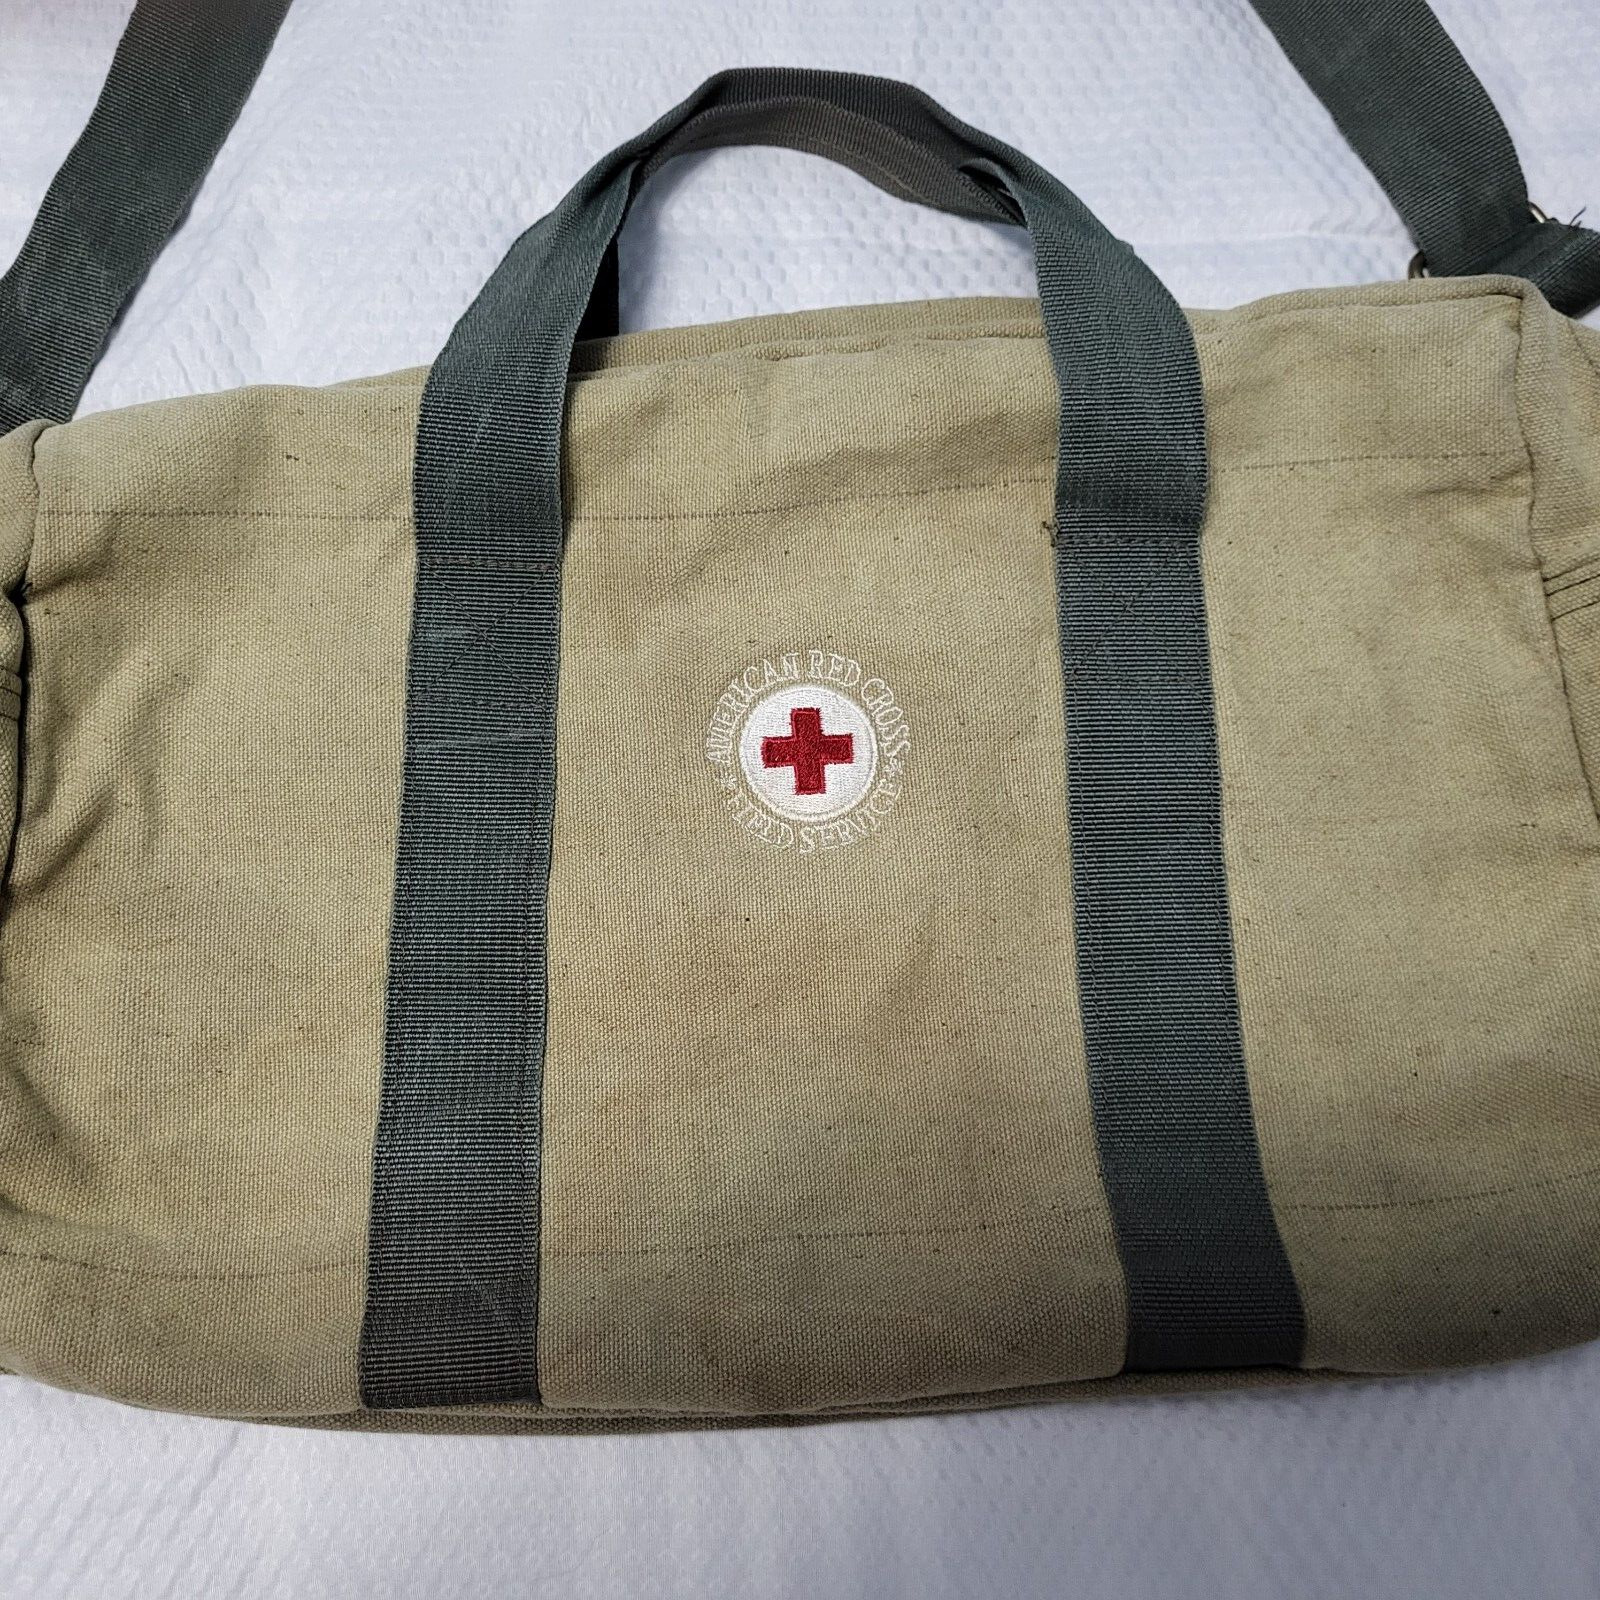 American Red Cross Field Service Duffle Bag Olive Green Canvas Vintage Look